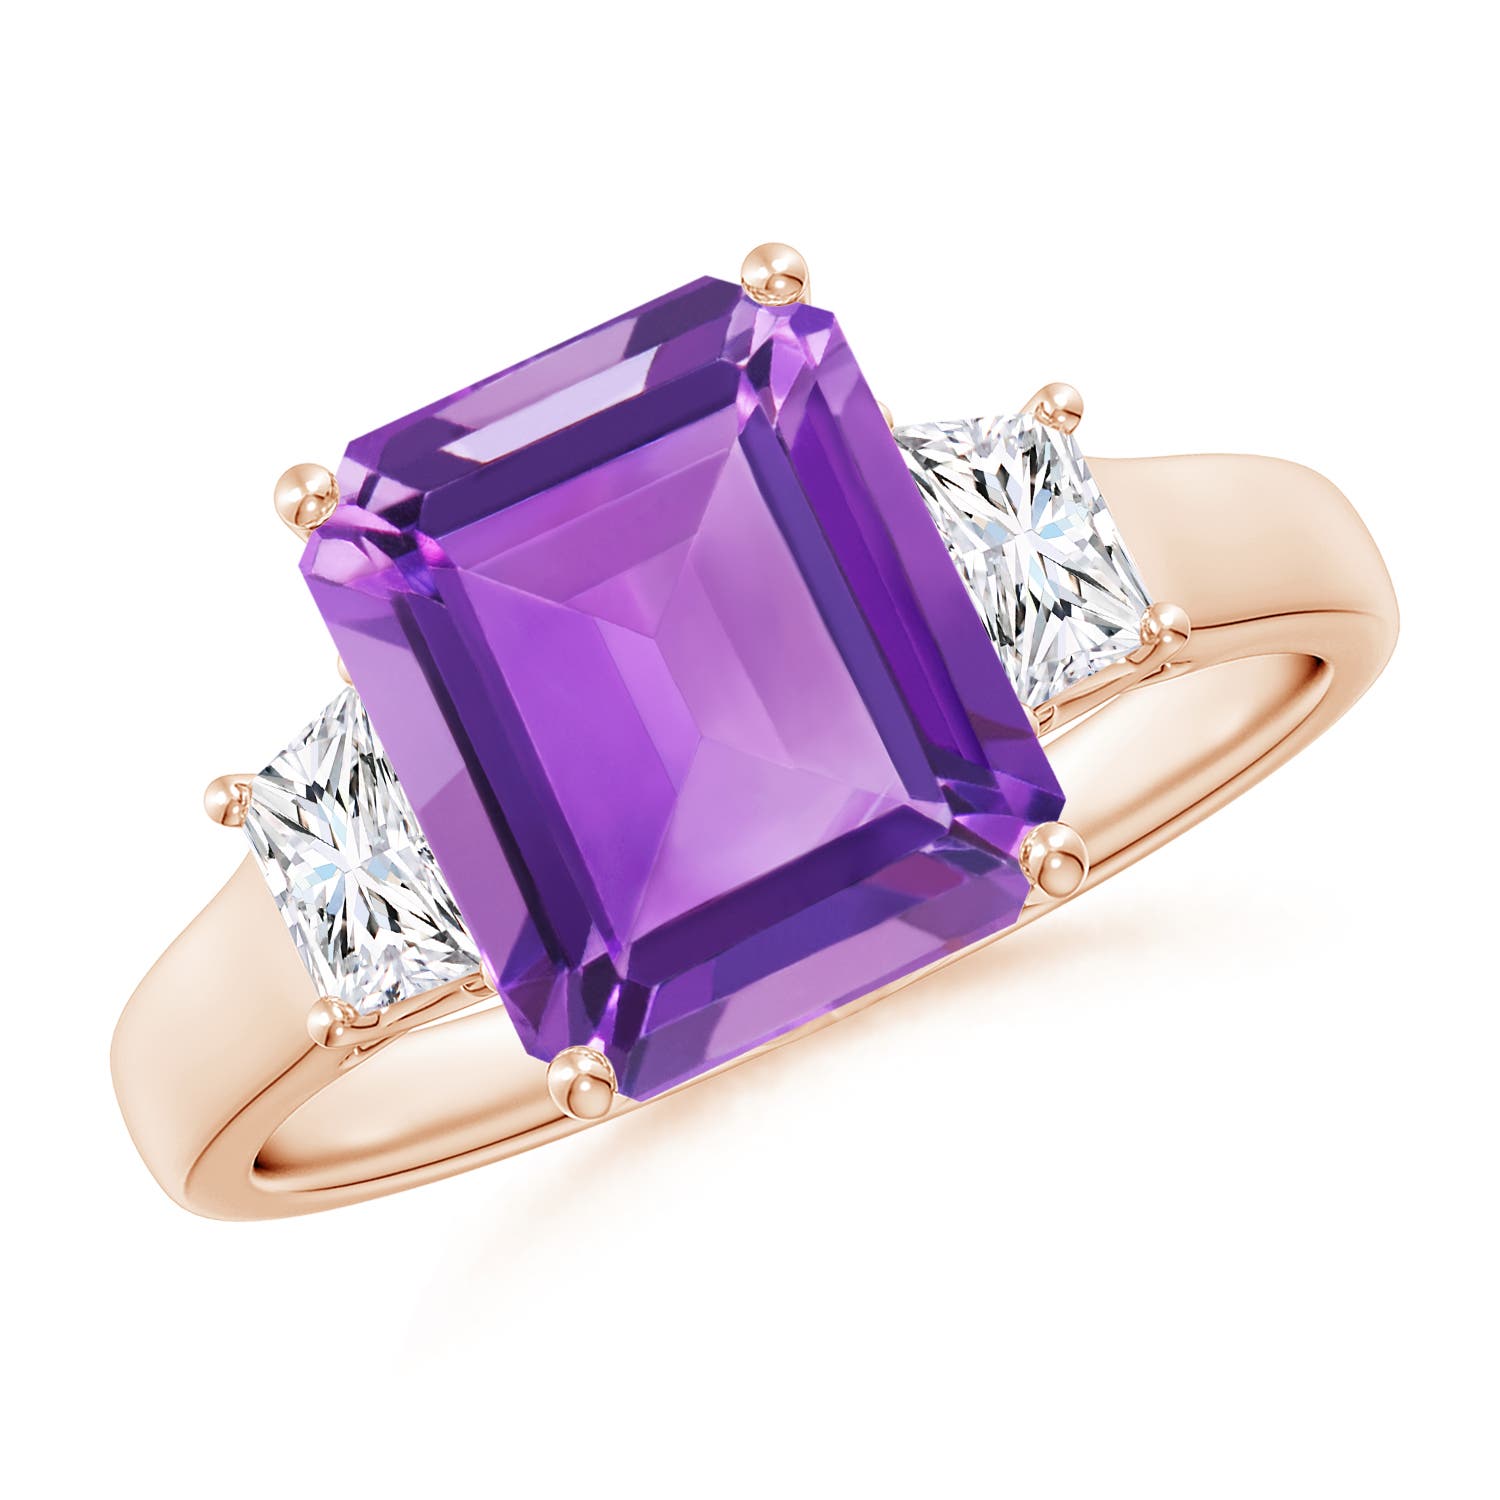 AA- Amethyst / 3.22 CT / 14 KT Rose Gold